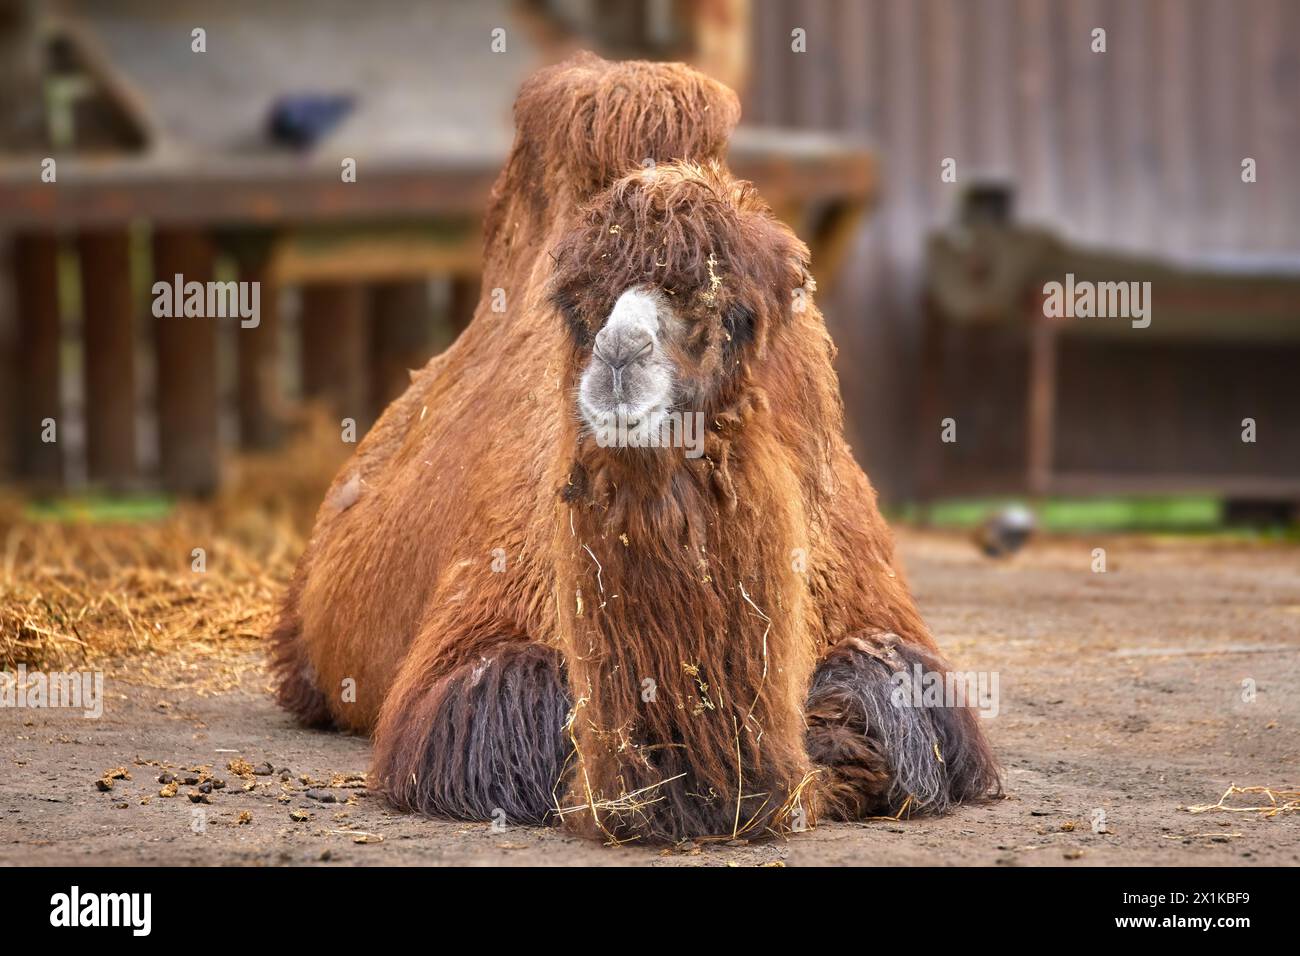 Image of a large red camel lying resting Stock Photo